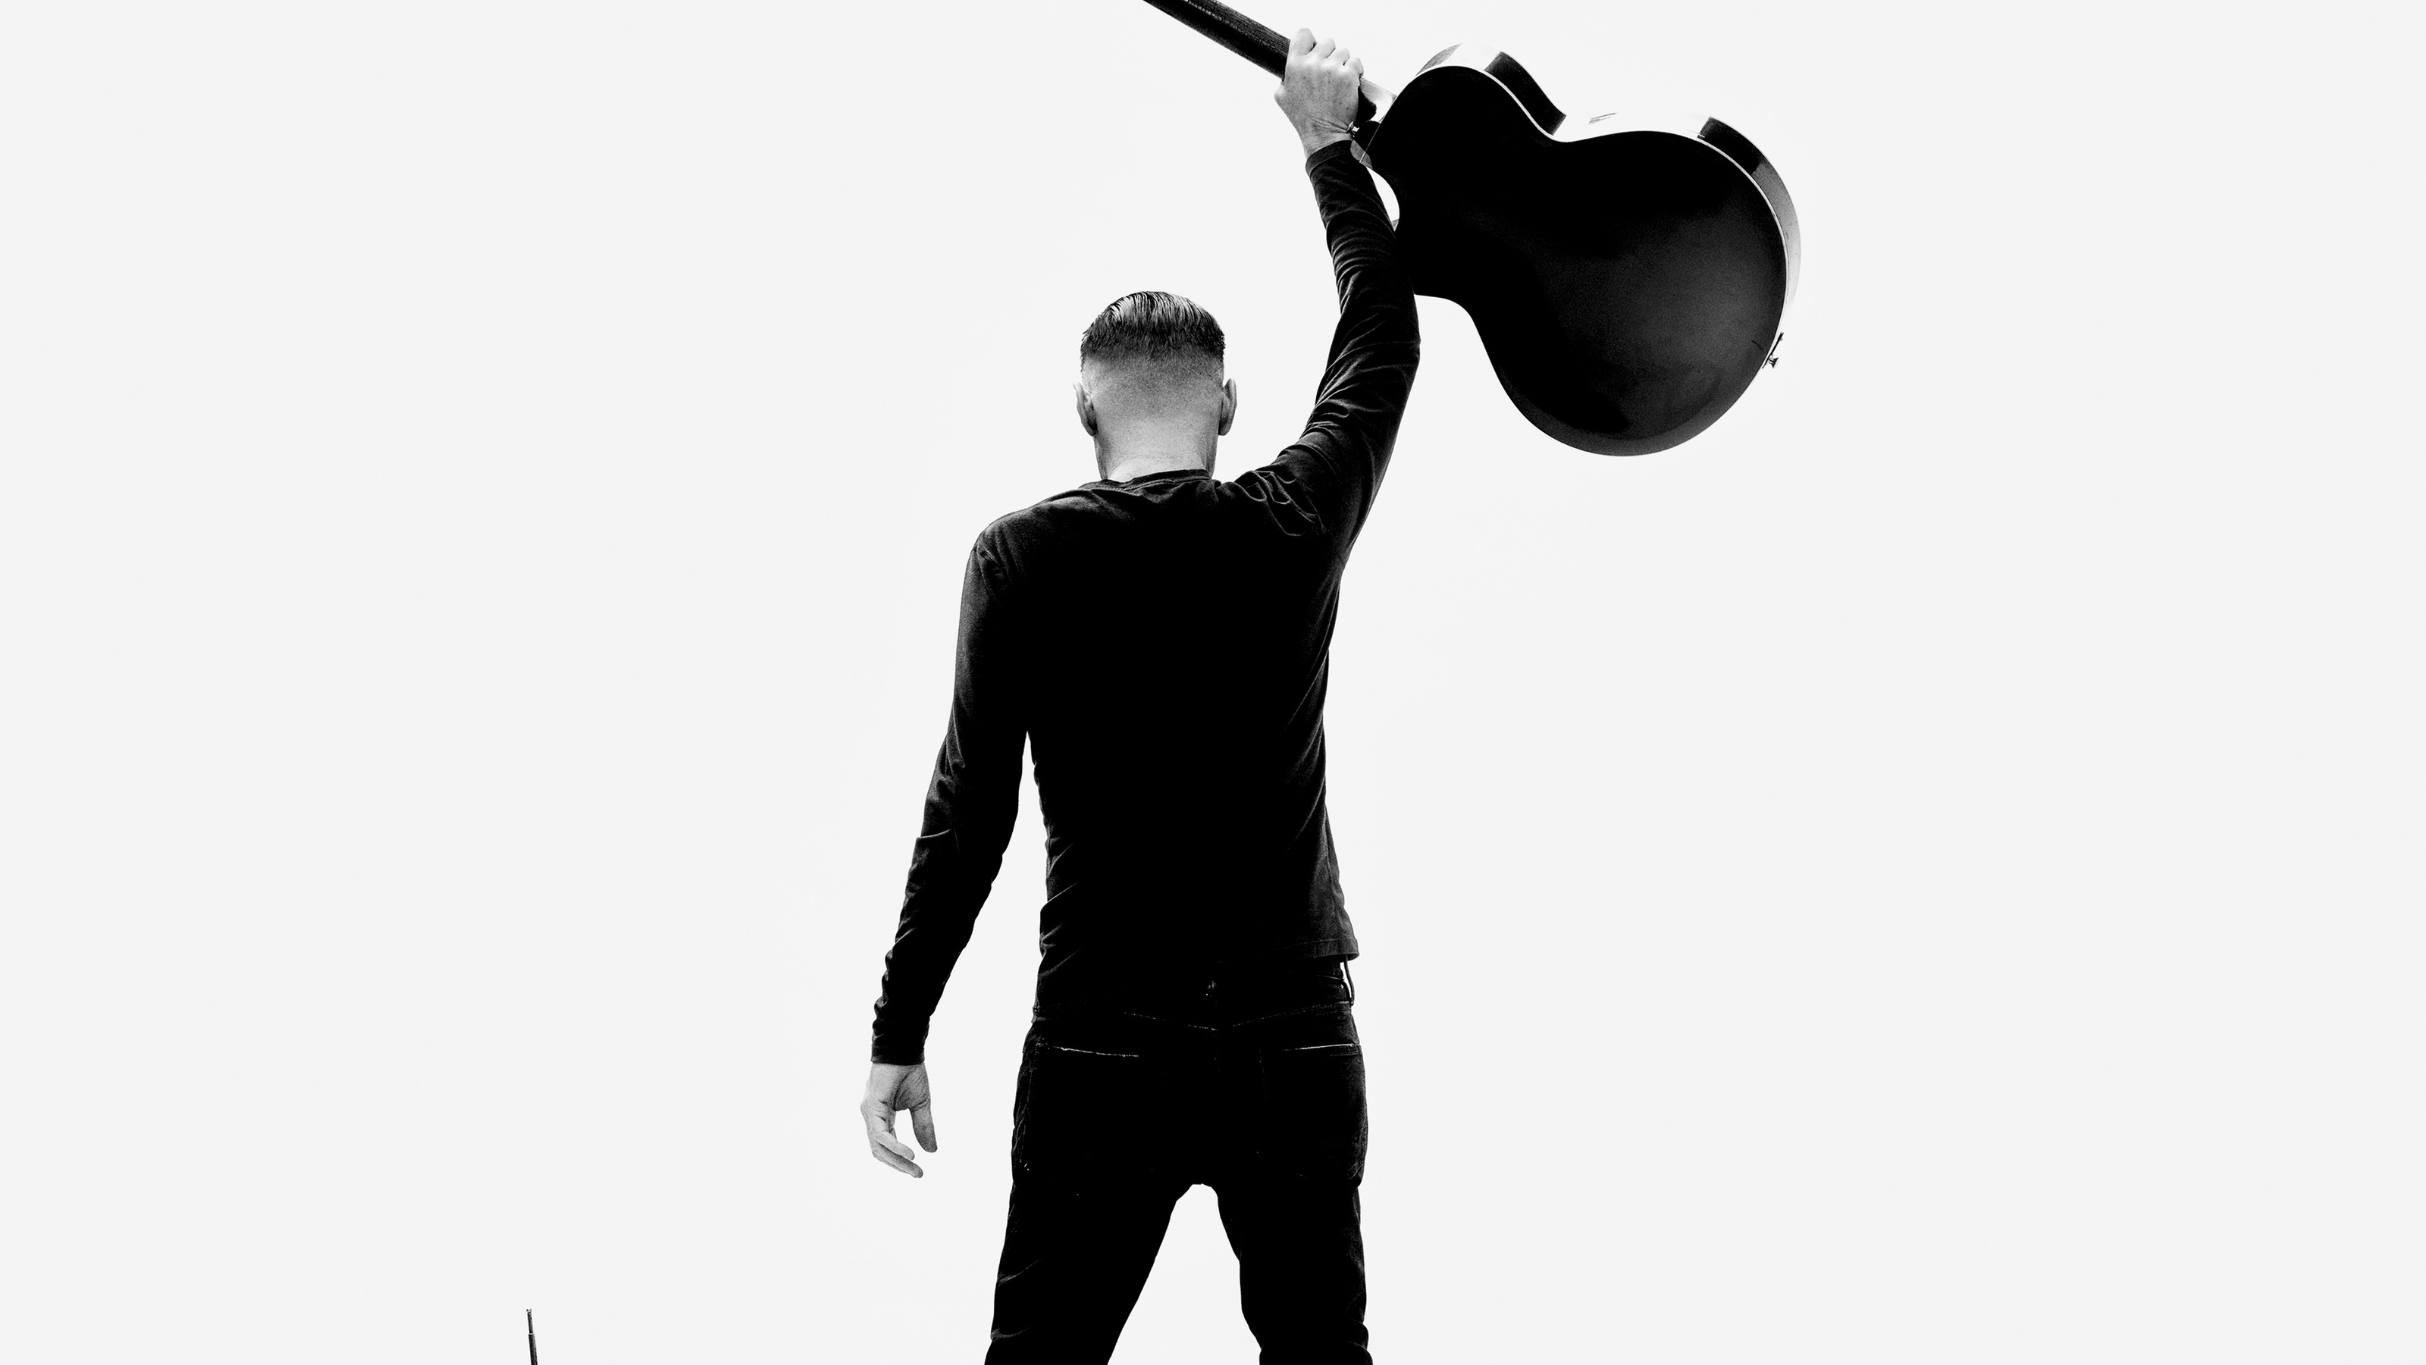 Bryan Adams in Halifax promo photo for Live Nation presale offer code